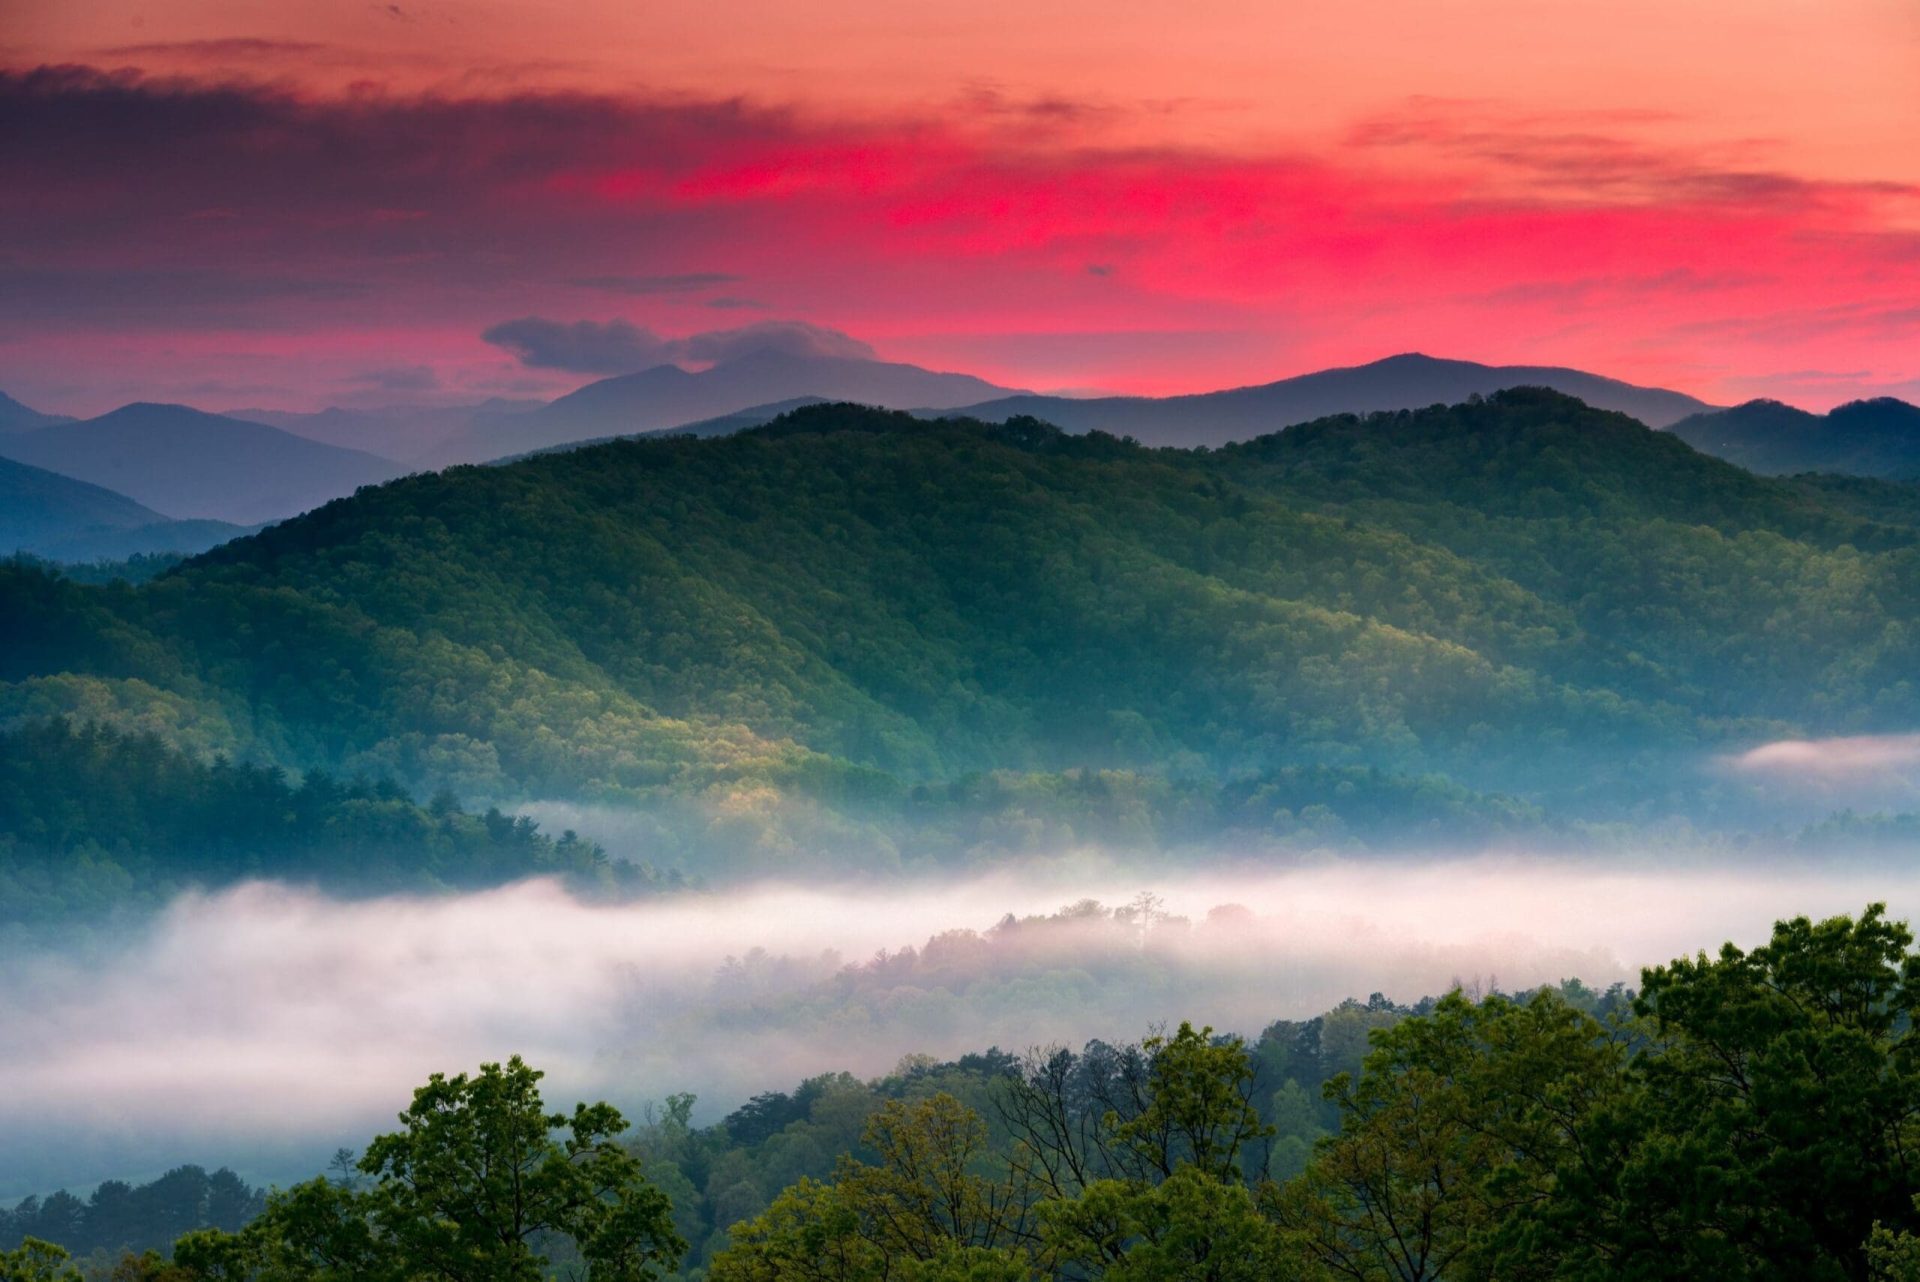 Great Smoky Mountains National Park Self-Guided Driving Tour